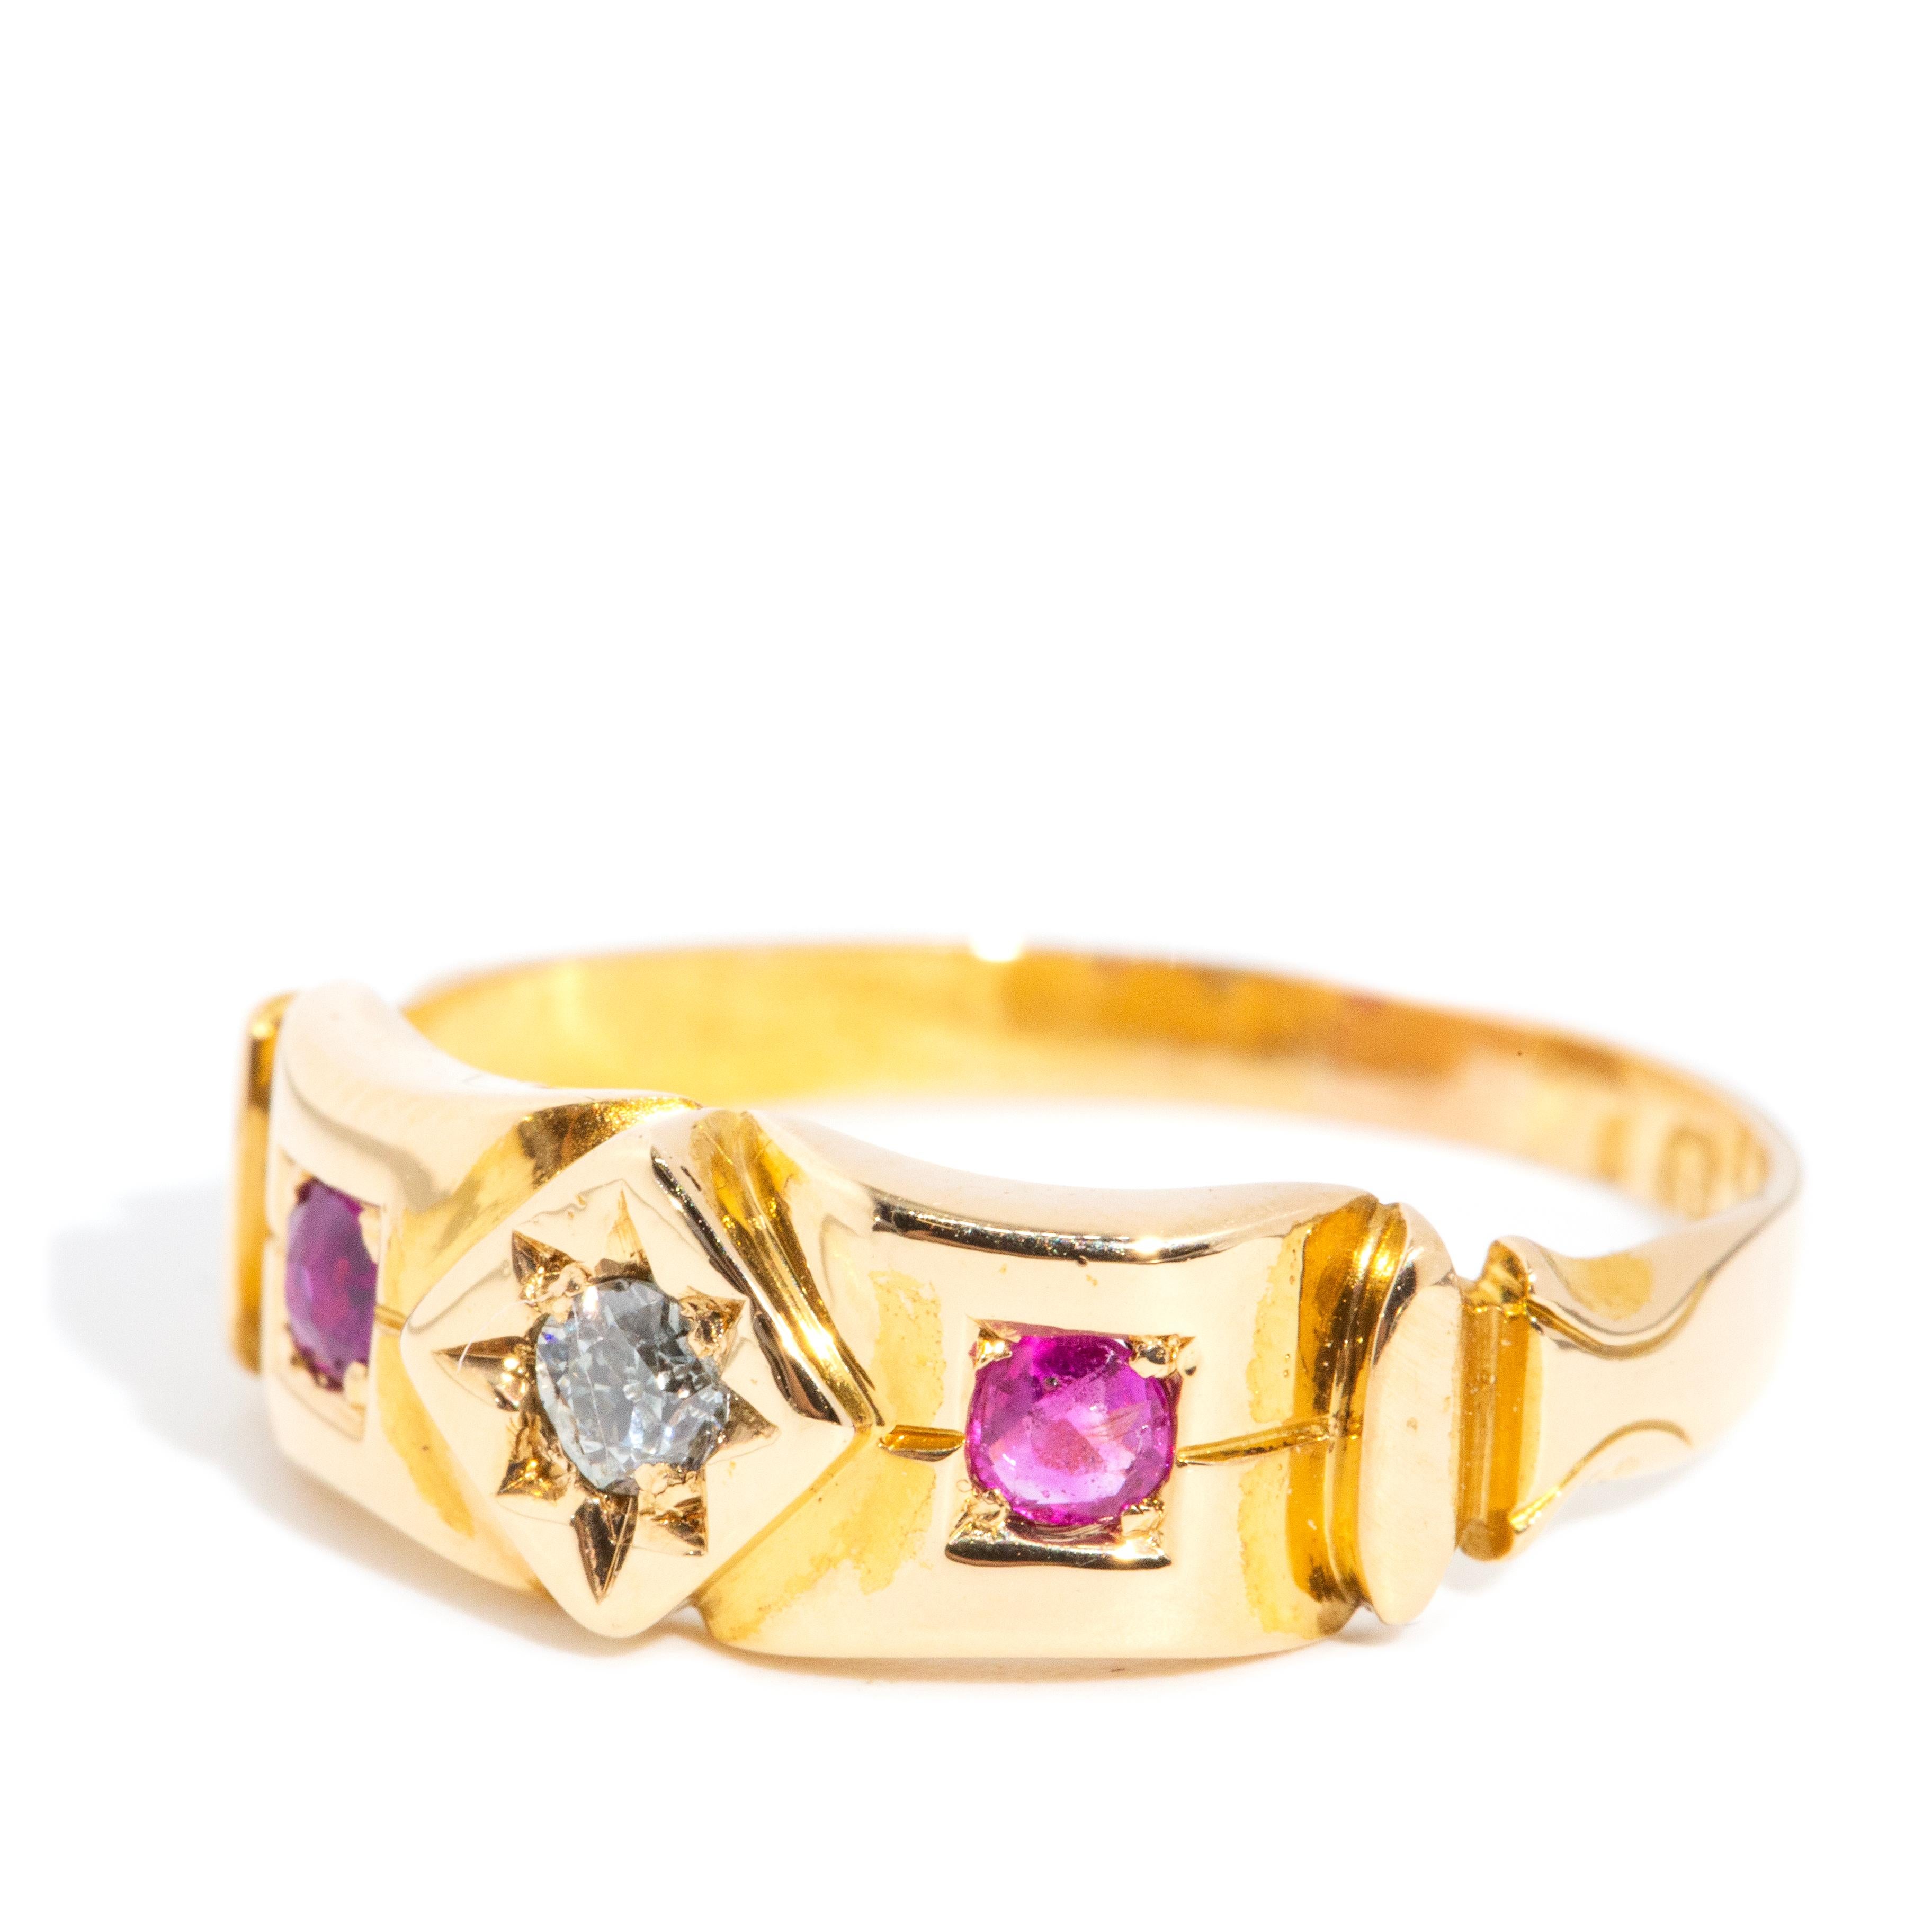 Antique Edwardian Hallmarked Old European Cut Diamond & Ruby Band 20 Carat Gold In Good Condition For Sale In Hamilton, AU